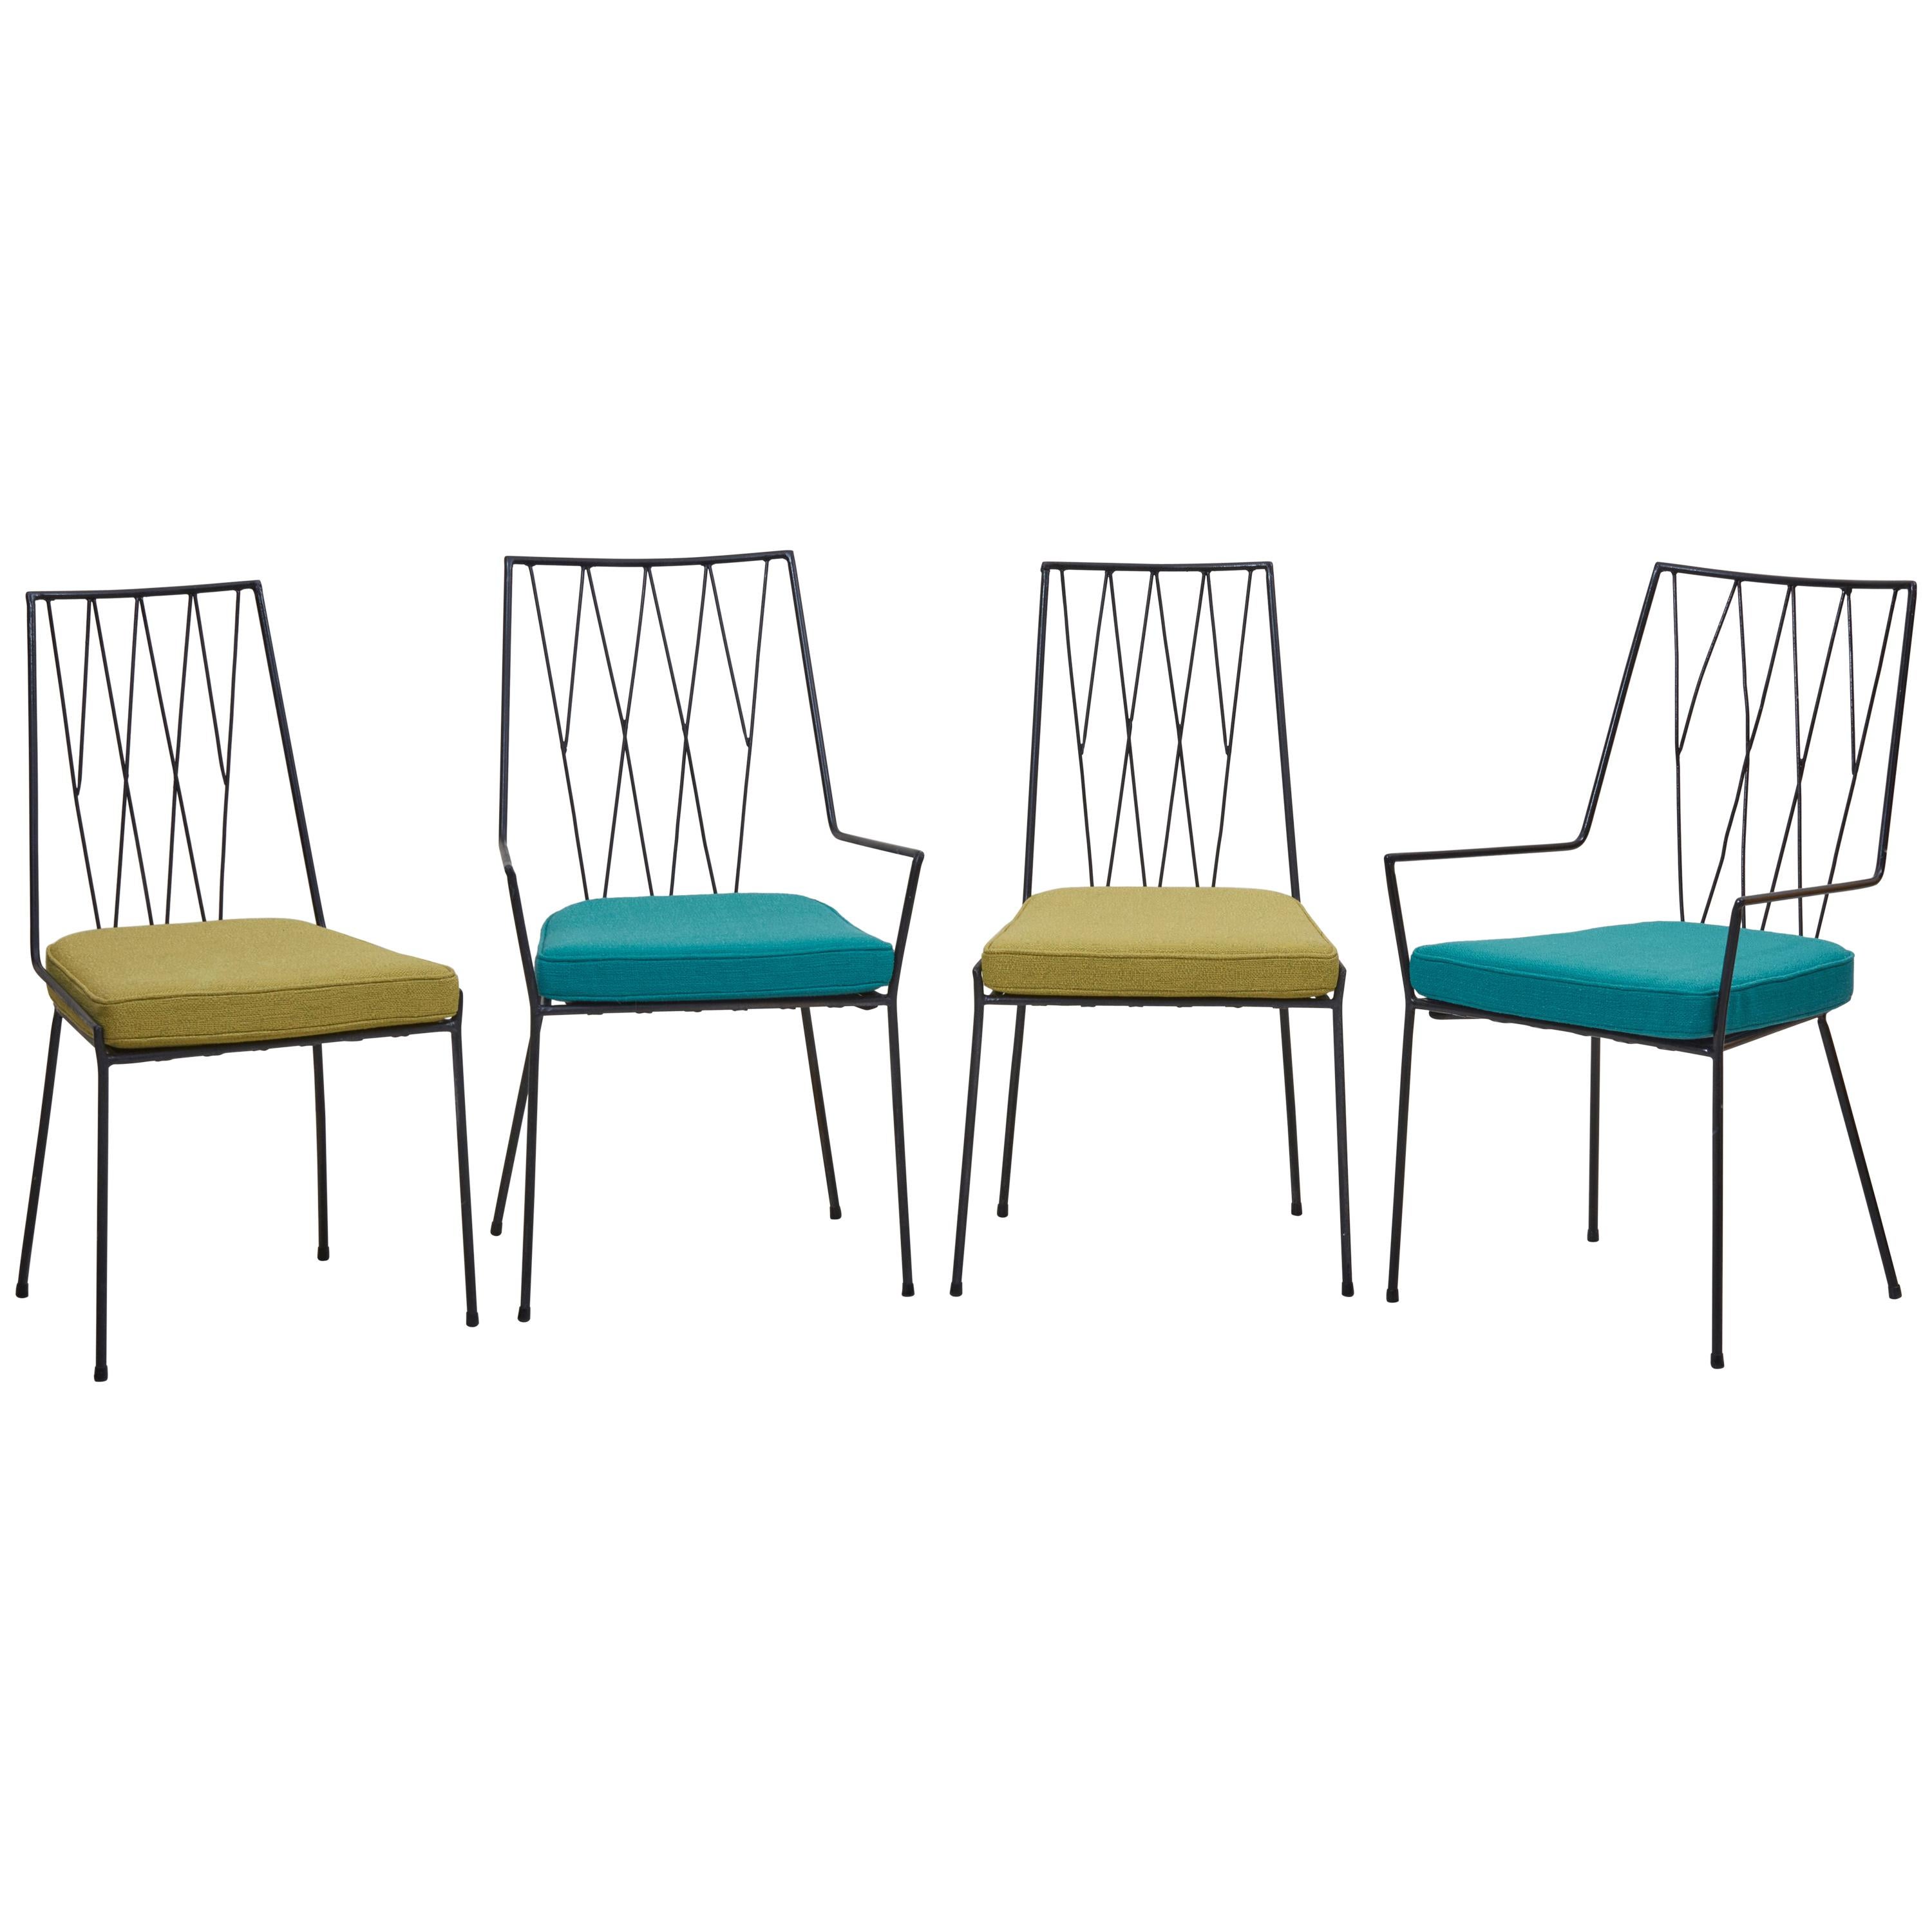 Set of four Paul McCobb Pavilion Collection Chairs for Arbuck, USA, 1953